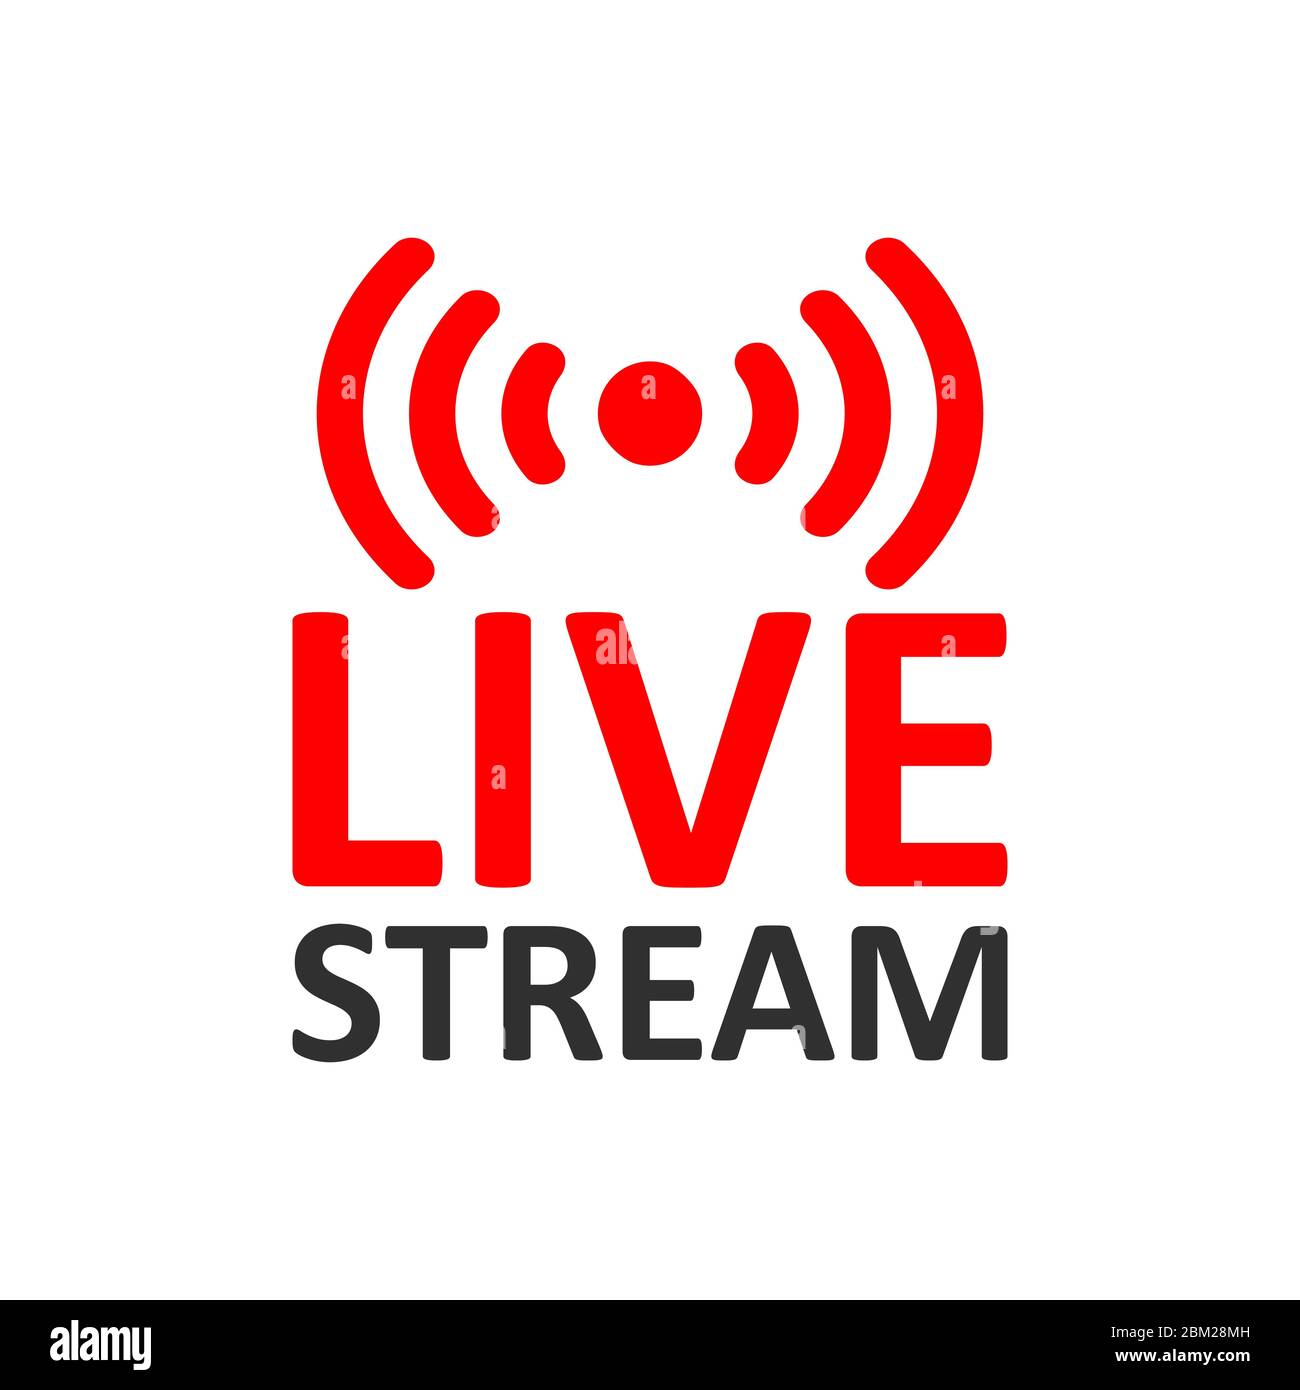 Live Stream sign. Red symbol, button of live streaming, broadcasting, online stream emblem. For tv, shows and social media live performances Stock Vector